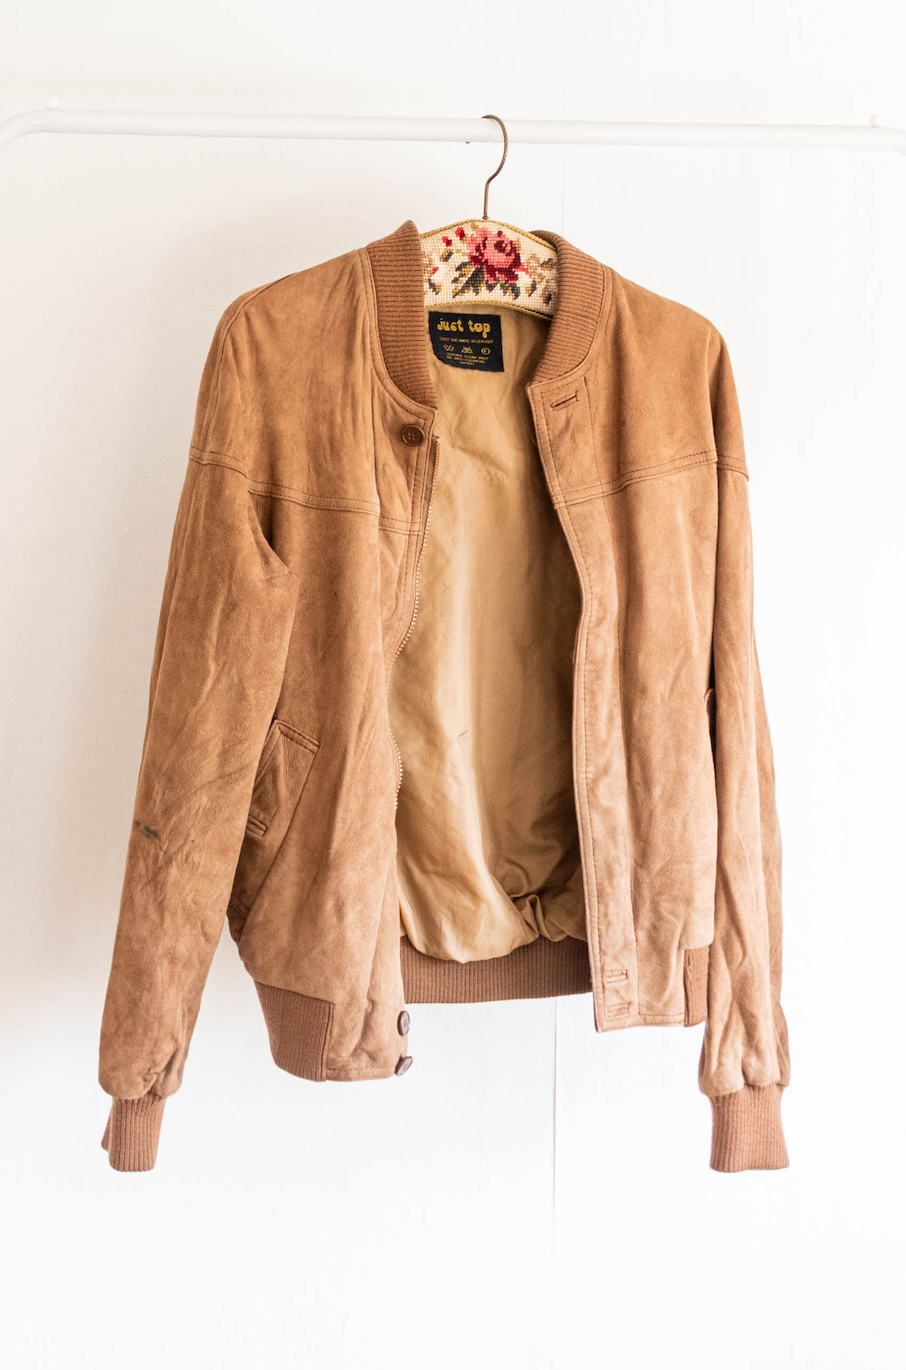 NEW IN! Suede bomber